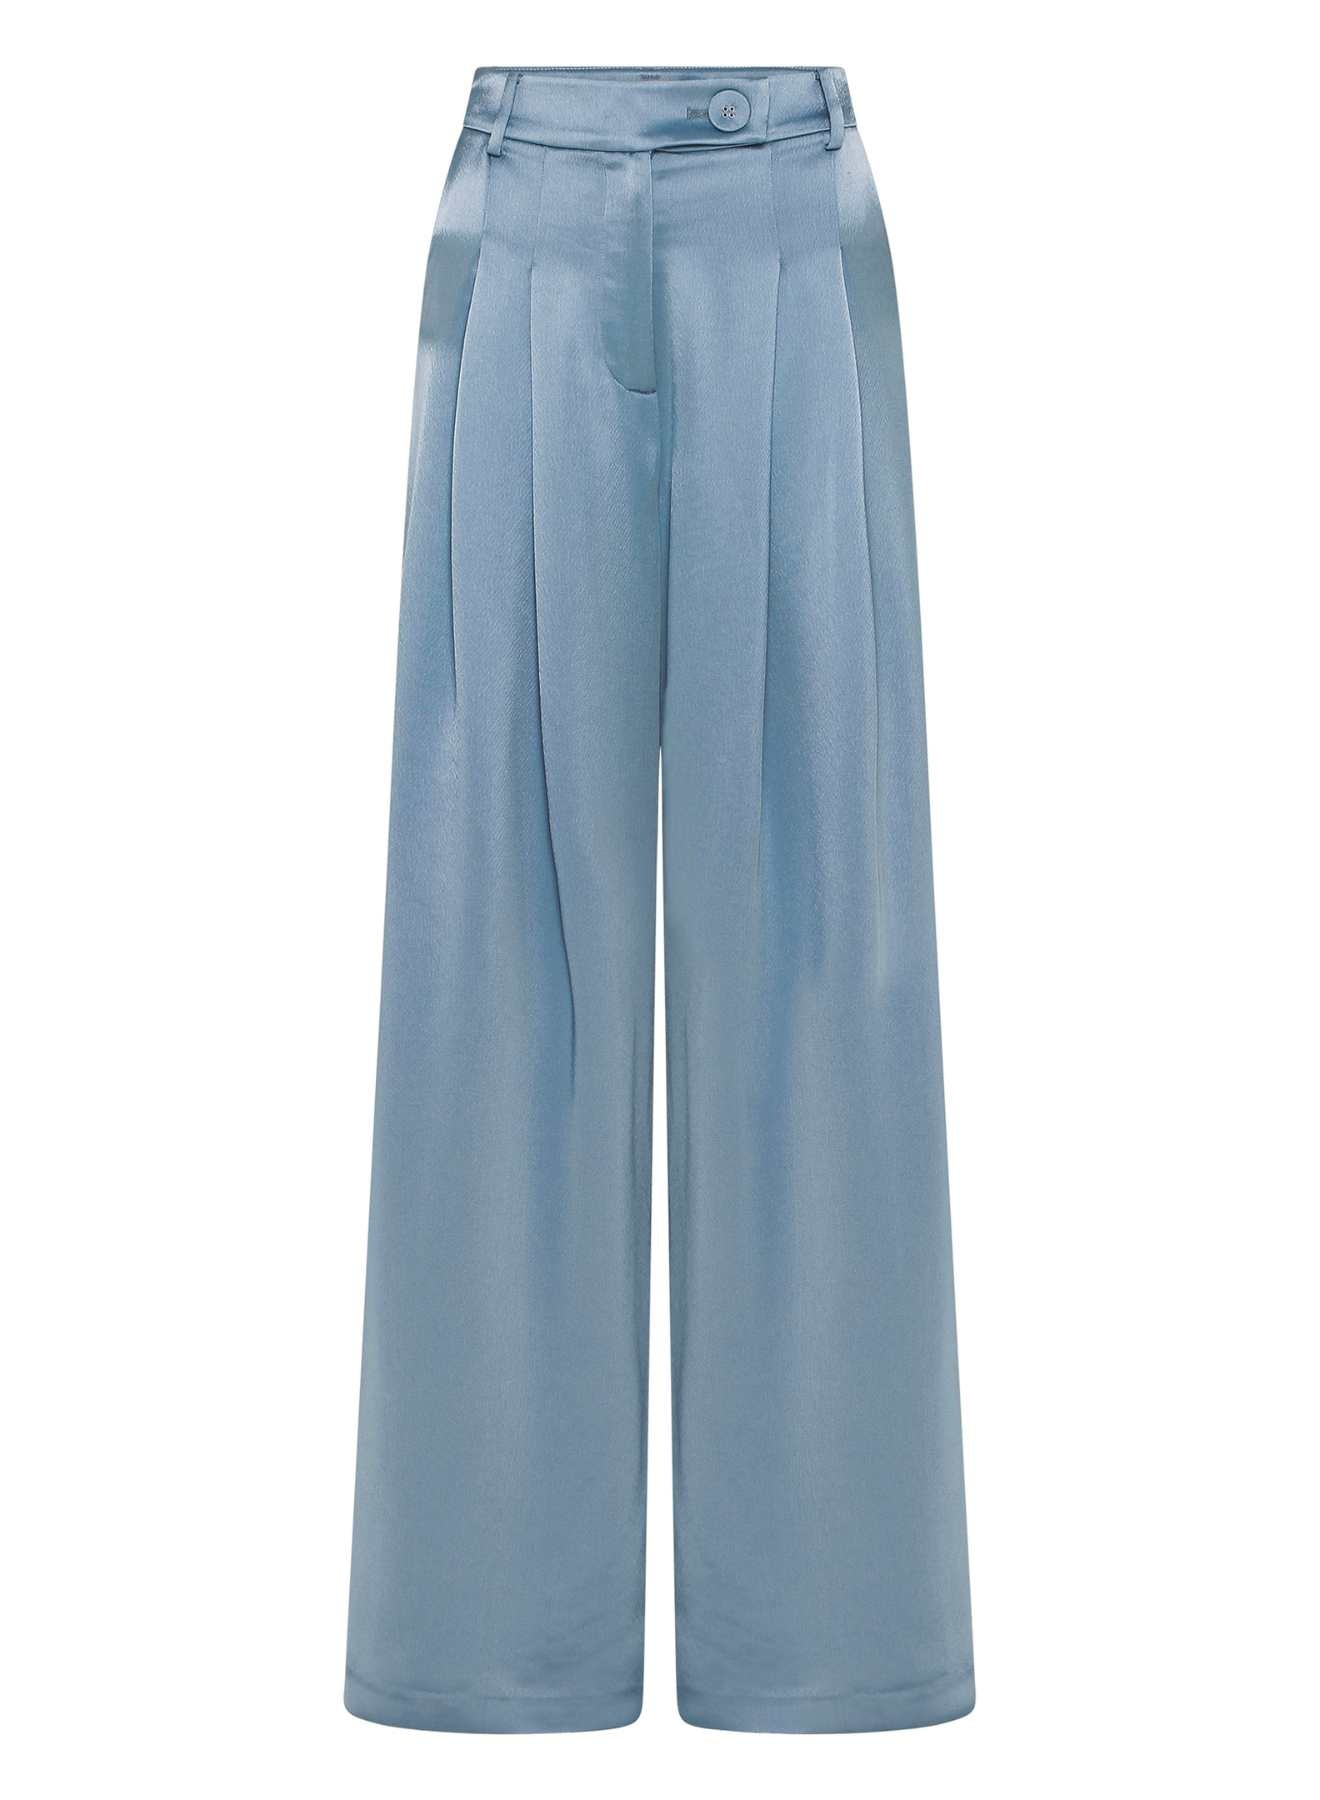 Wide-Leg Steel Satin Dress Pant featuring front pleating. High waist silhouette is constructed with front pleating, cut wide for fluid movement. Elevate your everyday wardrobe with this chic and versatile piece. Try for a day look with a basic top or match with the Mason Shirt for a dinner pant or party look. Dinner pant, event pant, everyday pant, wide-leg pant, dressy wide-leg pants.